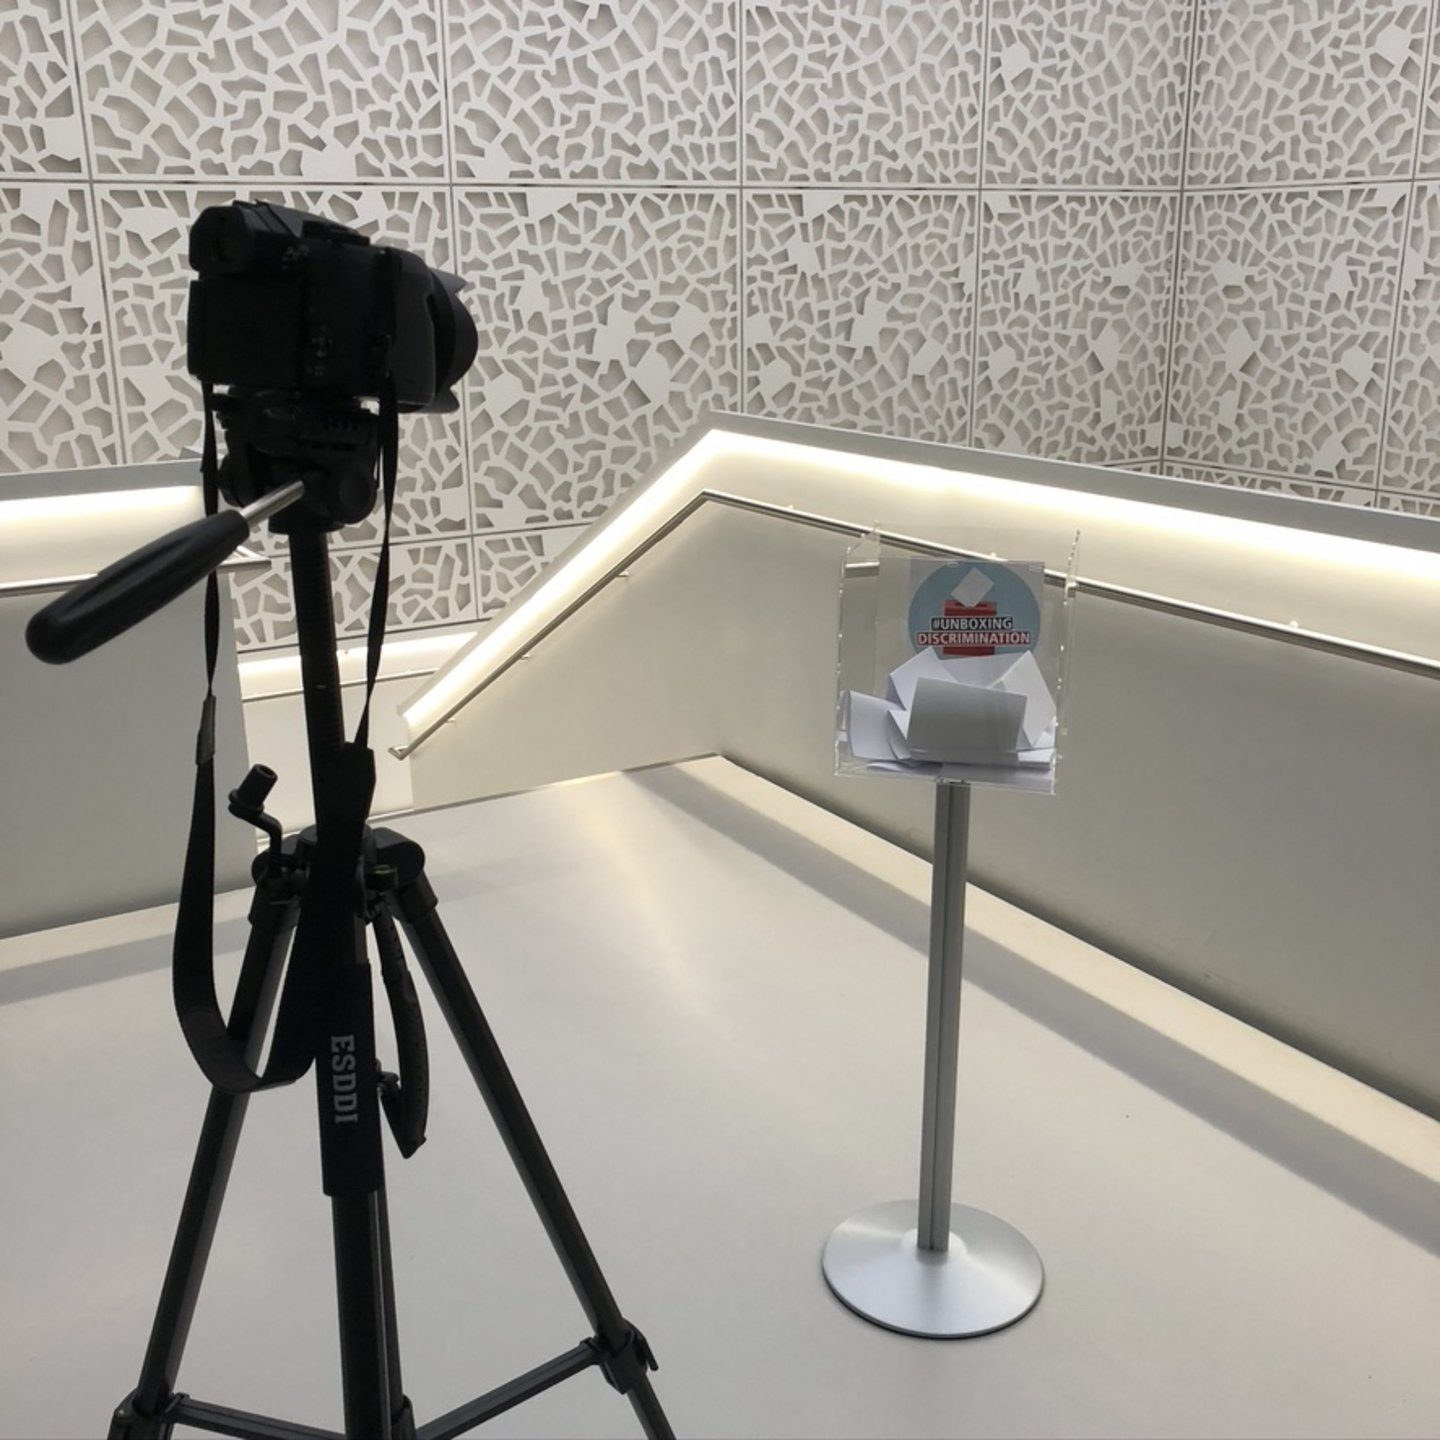 A camera on a tripod points to a plexiglass box on a silver stand, which stands in the stairway of the SSC of the University of Cologne. In this box are numerous white notes and the logo of the campaign #unboxingdiscrimination.